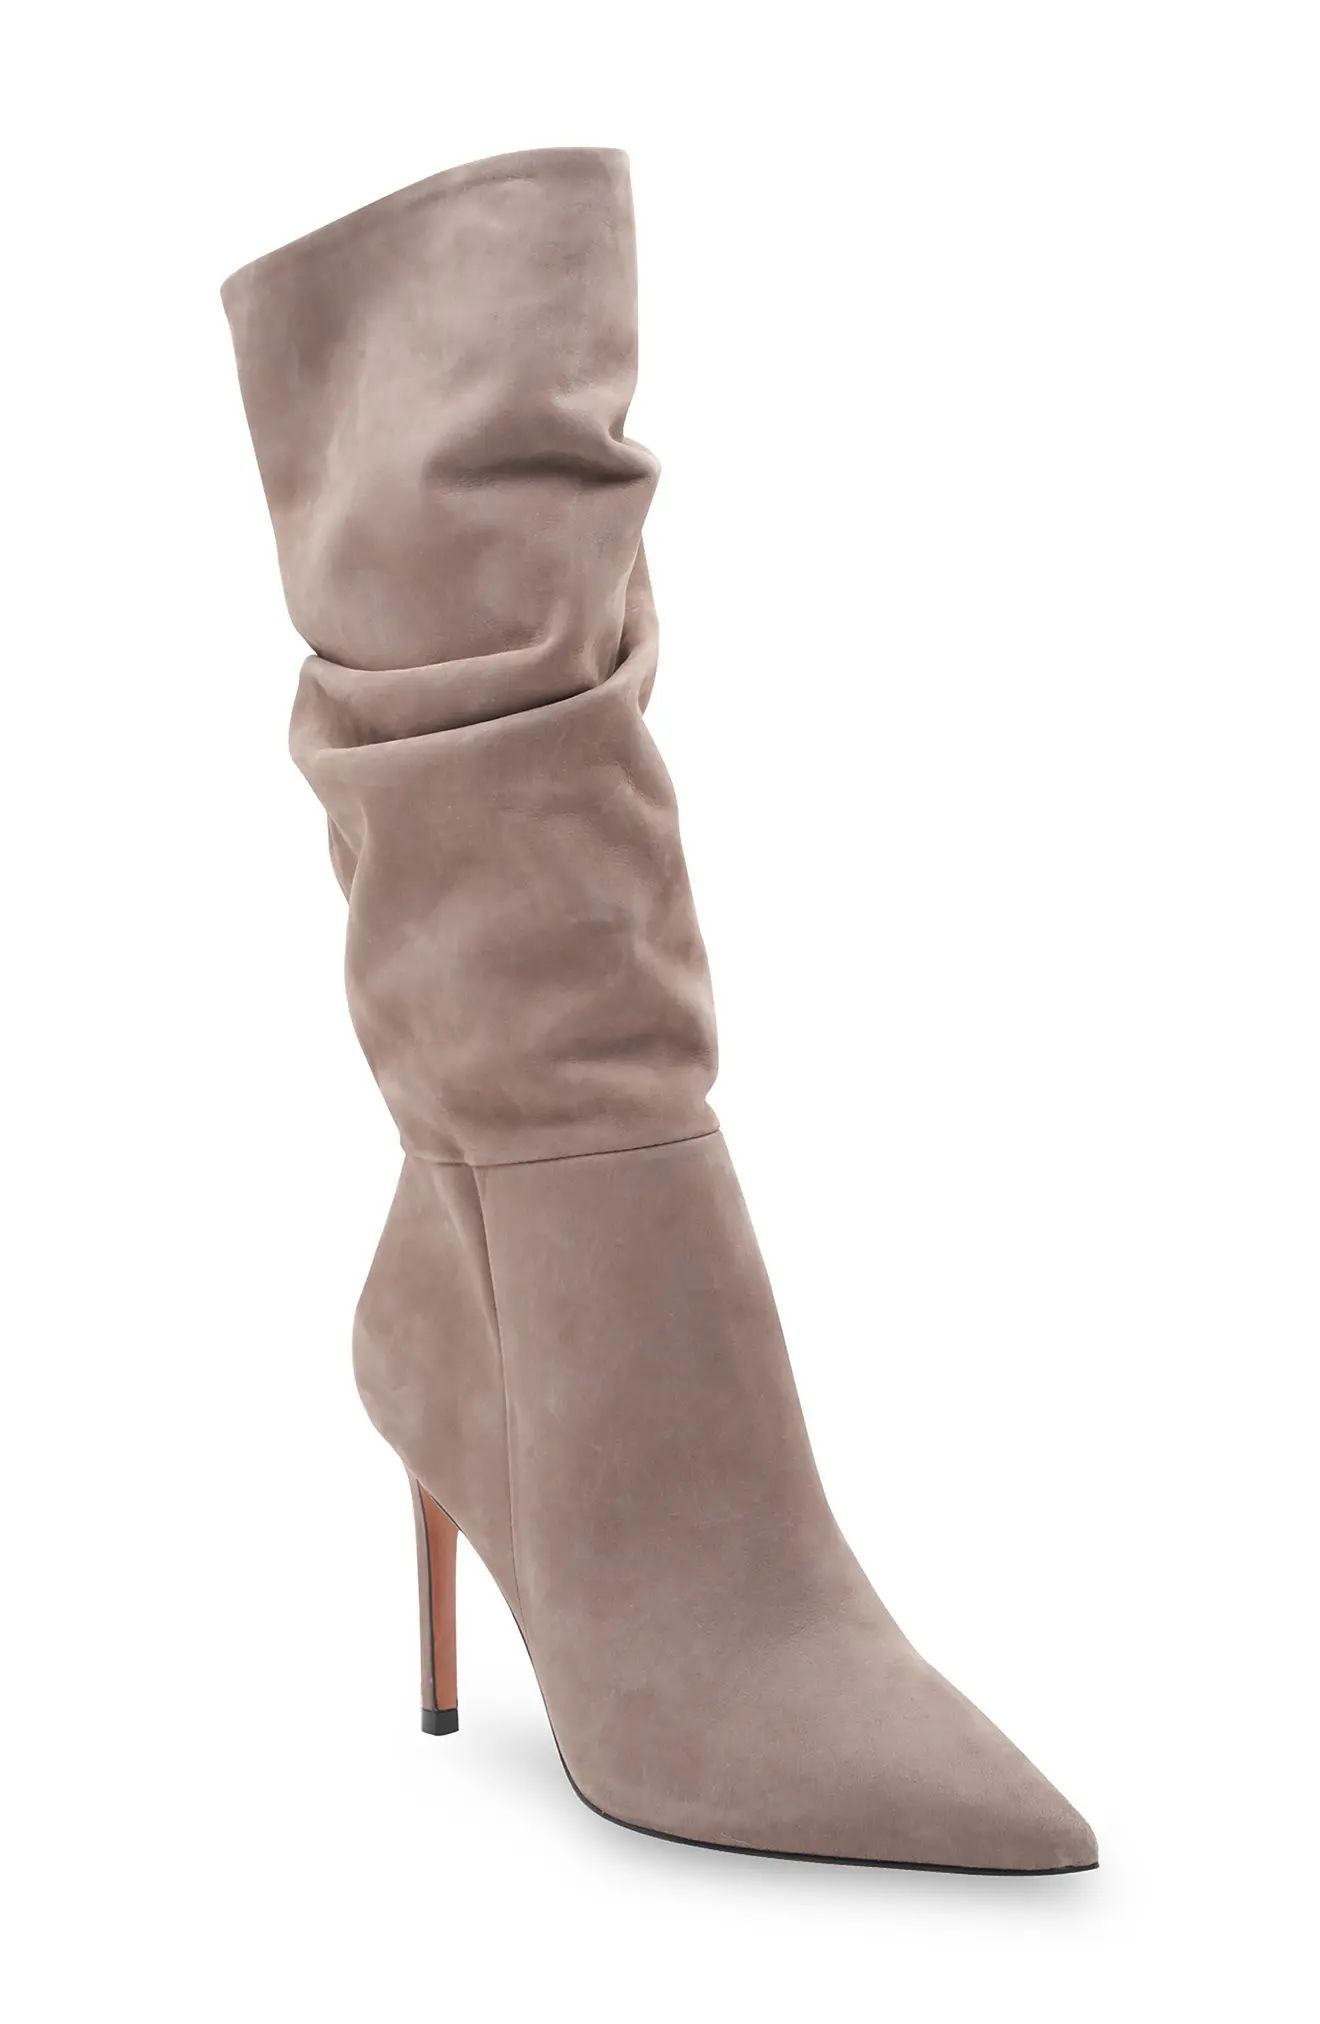 BCBGMAXAZRIA Toni Suede Boot, Size 5 in Taupe at Nordstrom | Nordstrom